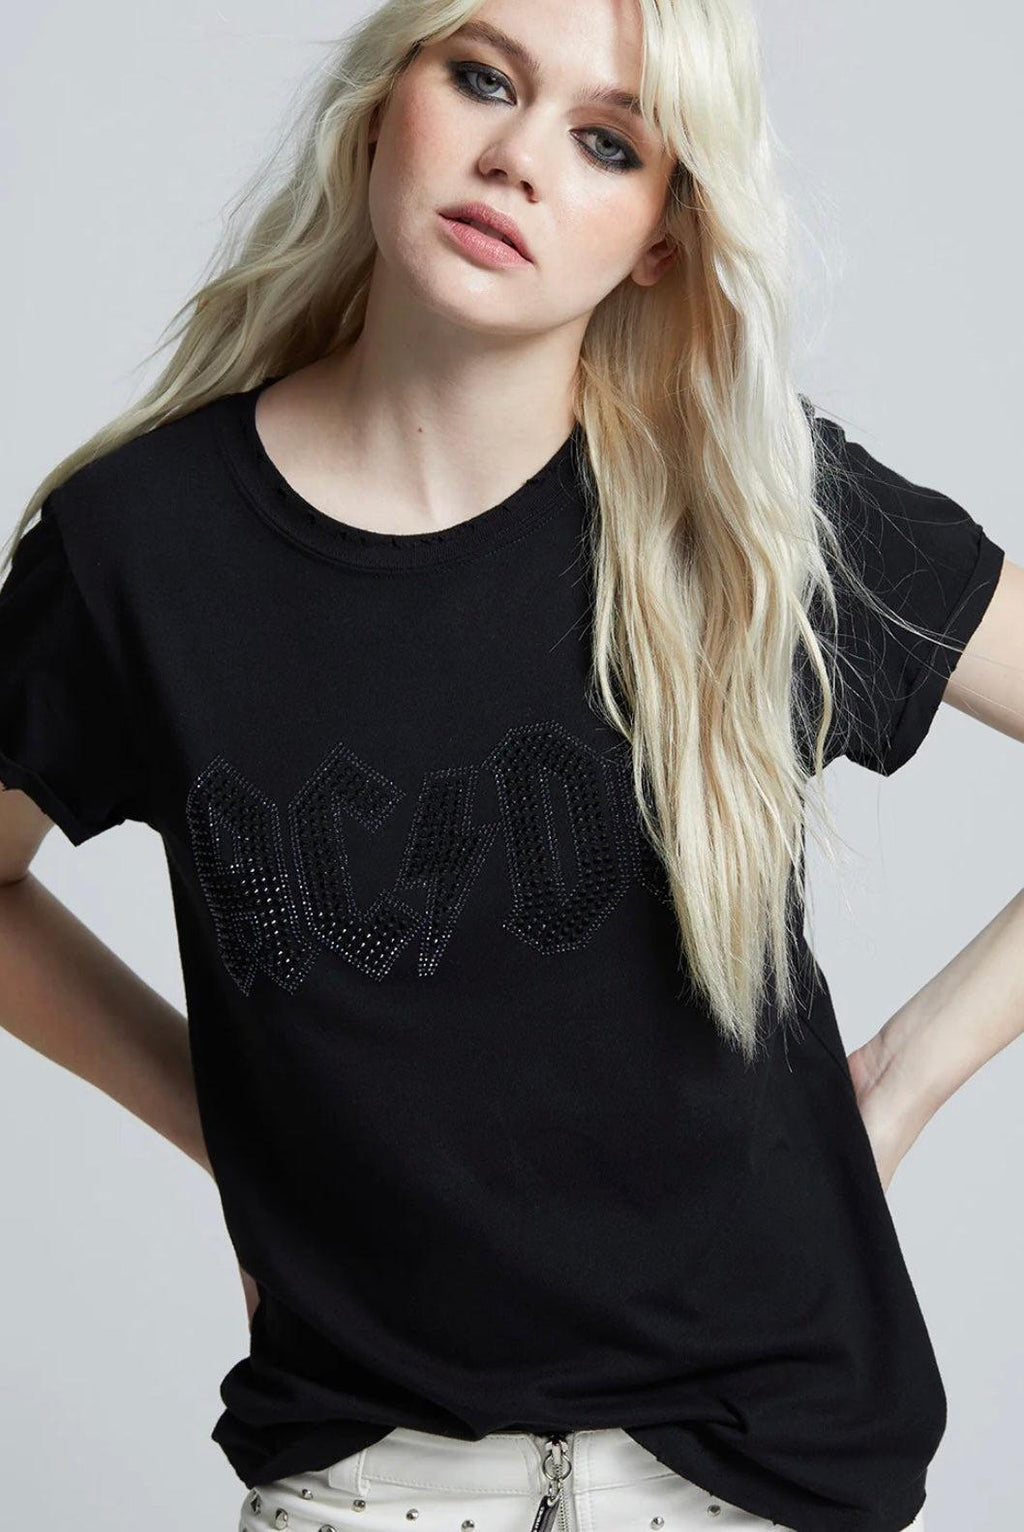 ACDC Rocker Tee-100 Short Sleeve Tops-ACDC Rocker Tee, ACDC Studded Tee, Black Concert Tee, Concert Tee, Max Retail-[option4]-[option5]-[option6]-Womens-USA-Clothing-Boutique-Shop-Online-Clothes Minded